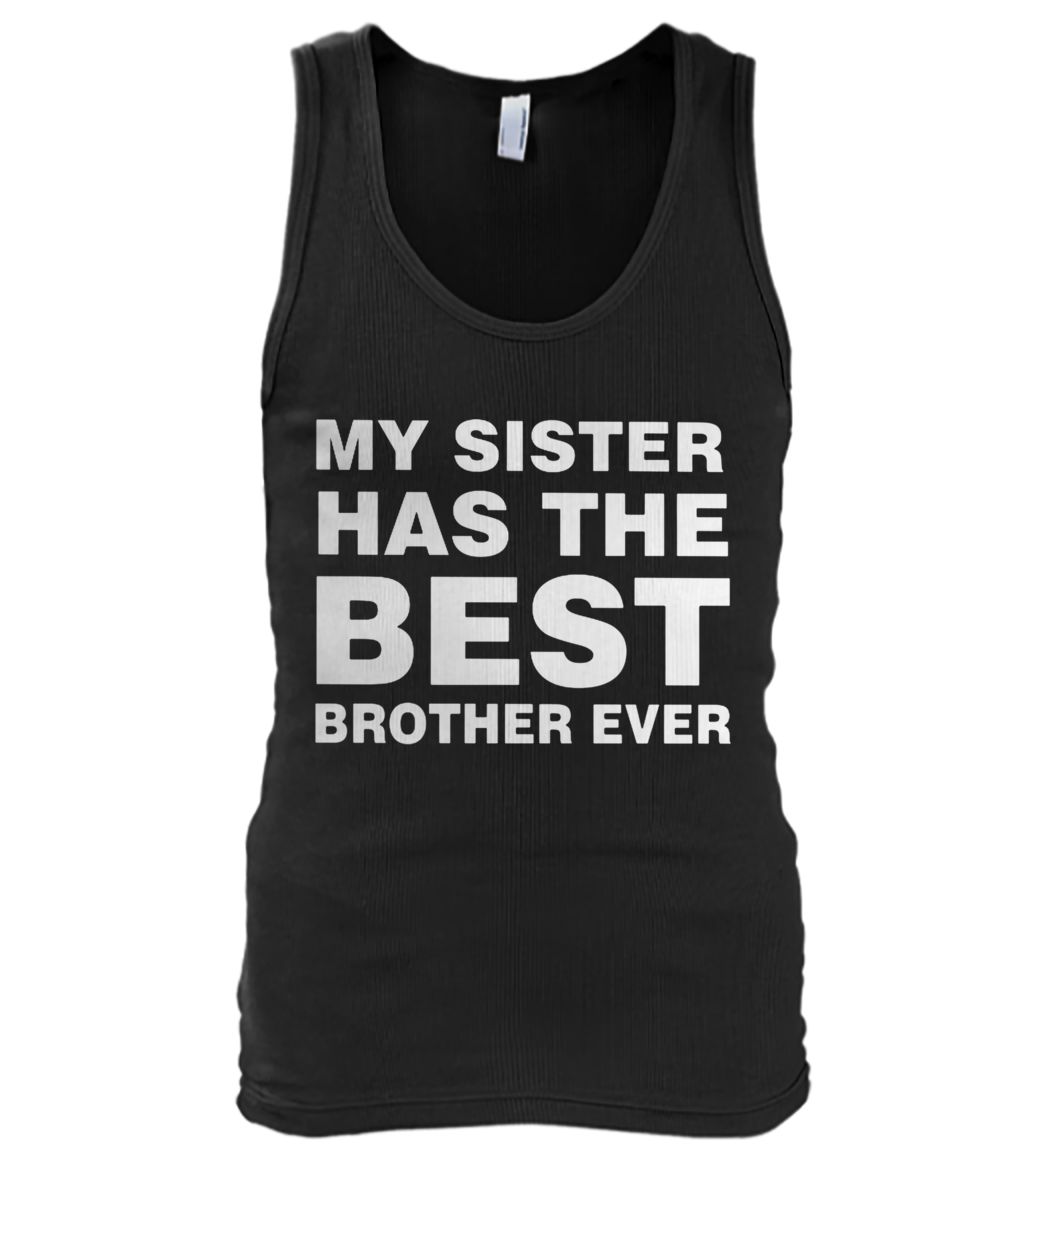 My sister has the best brother ever men's tank top